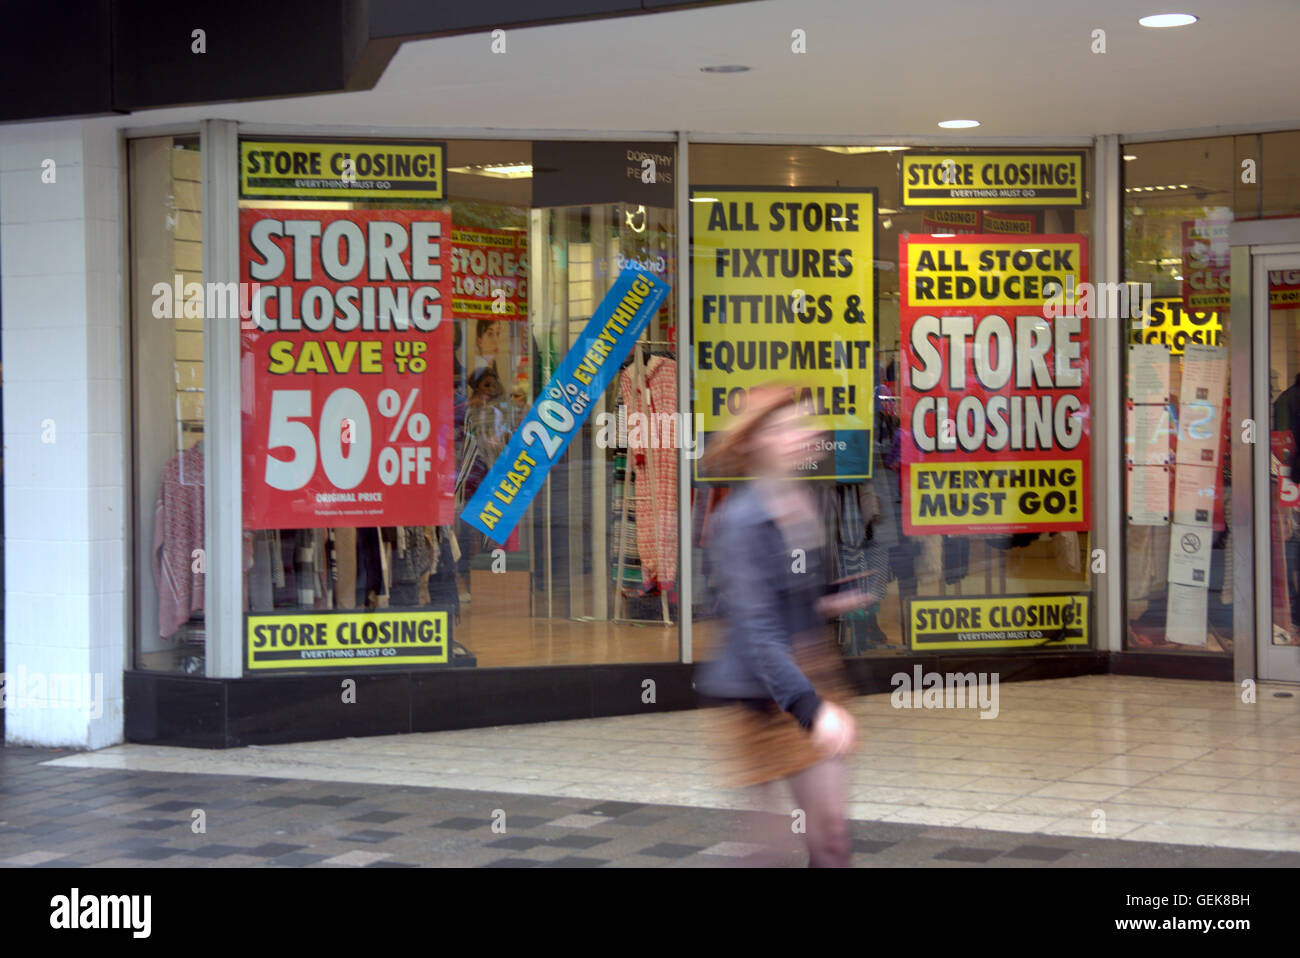 Glasgow, Scotland, UK 26th July 2016.BHS stores closure dates announced. All stores now officially given closure dates and told to sell everything even the fixtures and fittings. The Glasgow site pictured on Sauchiehall Street is soon to be vacated by collapsed retailer BHS has been earmarked for a £75million redevelopment already, Credit:  Gerard Ferry/Alamy Live News Stock Photo